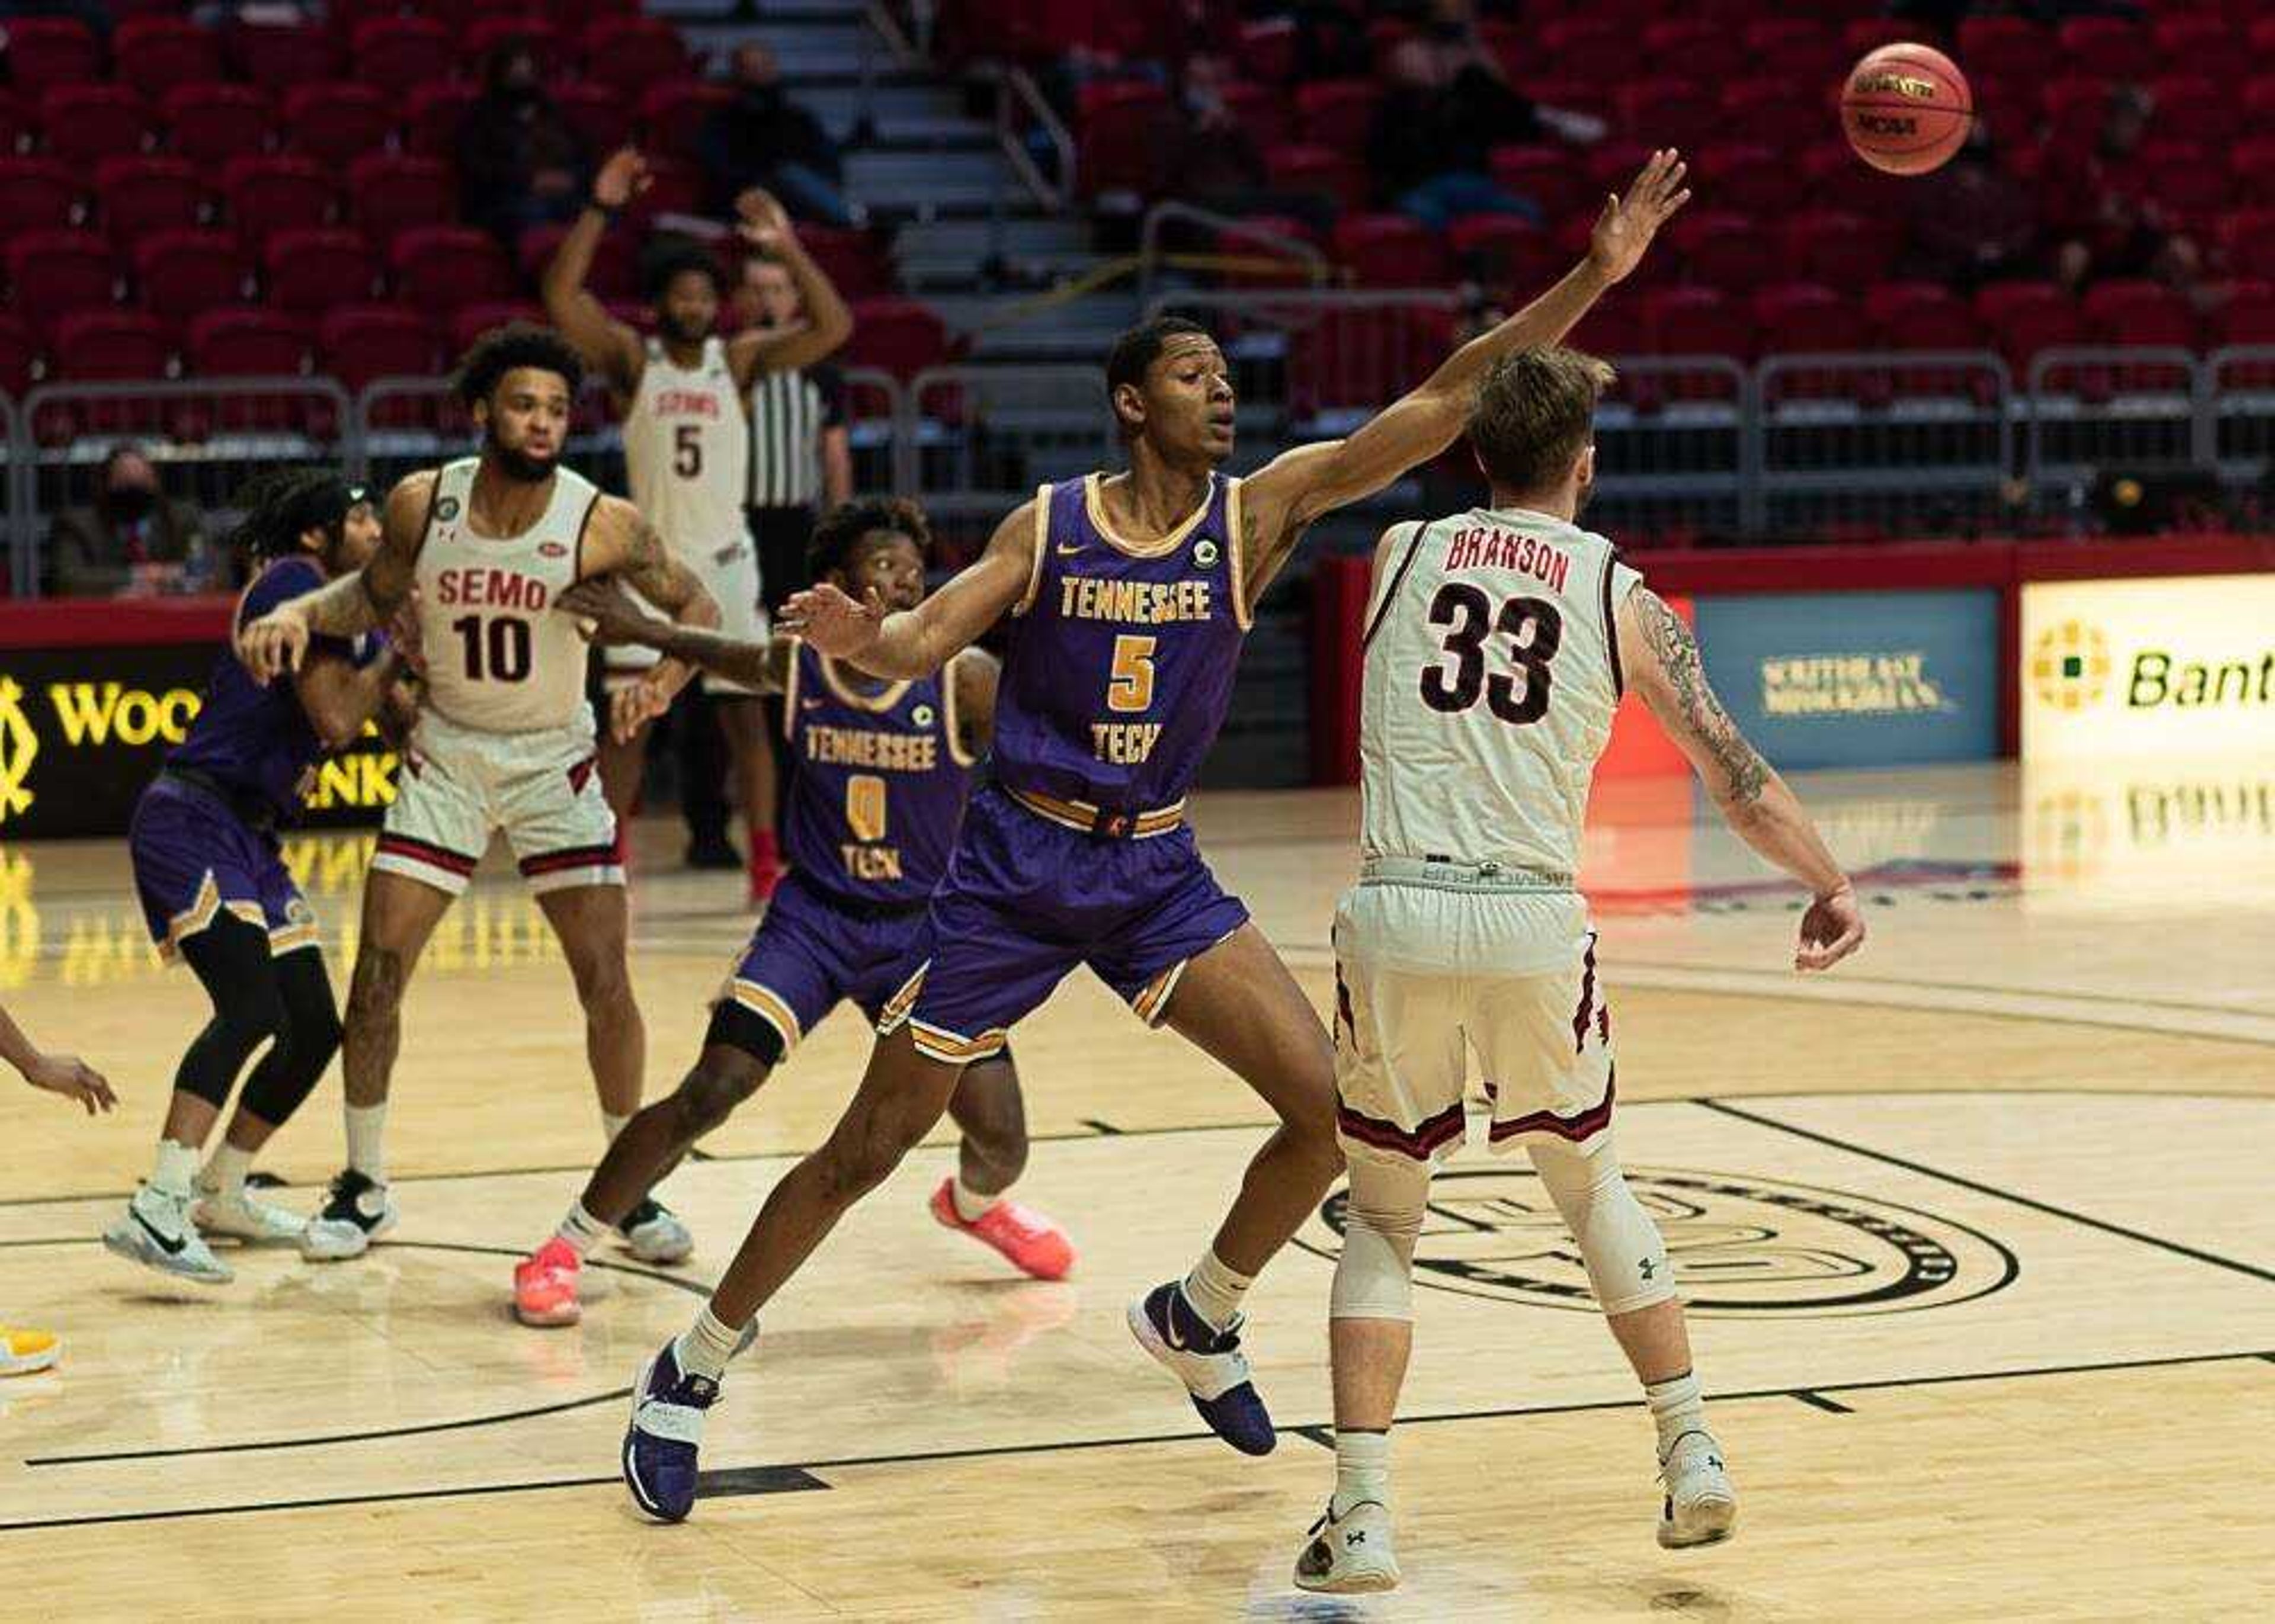 Freshman forward Dylan Branson passes the ball during Southeast's 68-64 win over Tennessee Tech on Feb. 4 at the Show Me Center in Cape Girardeau.